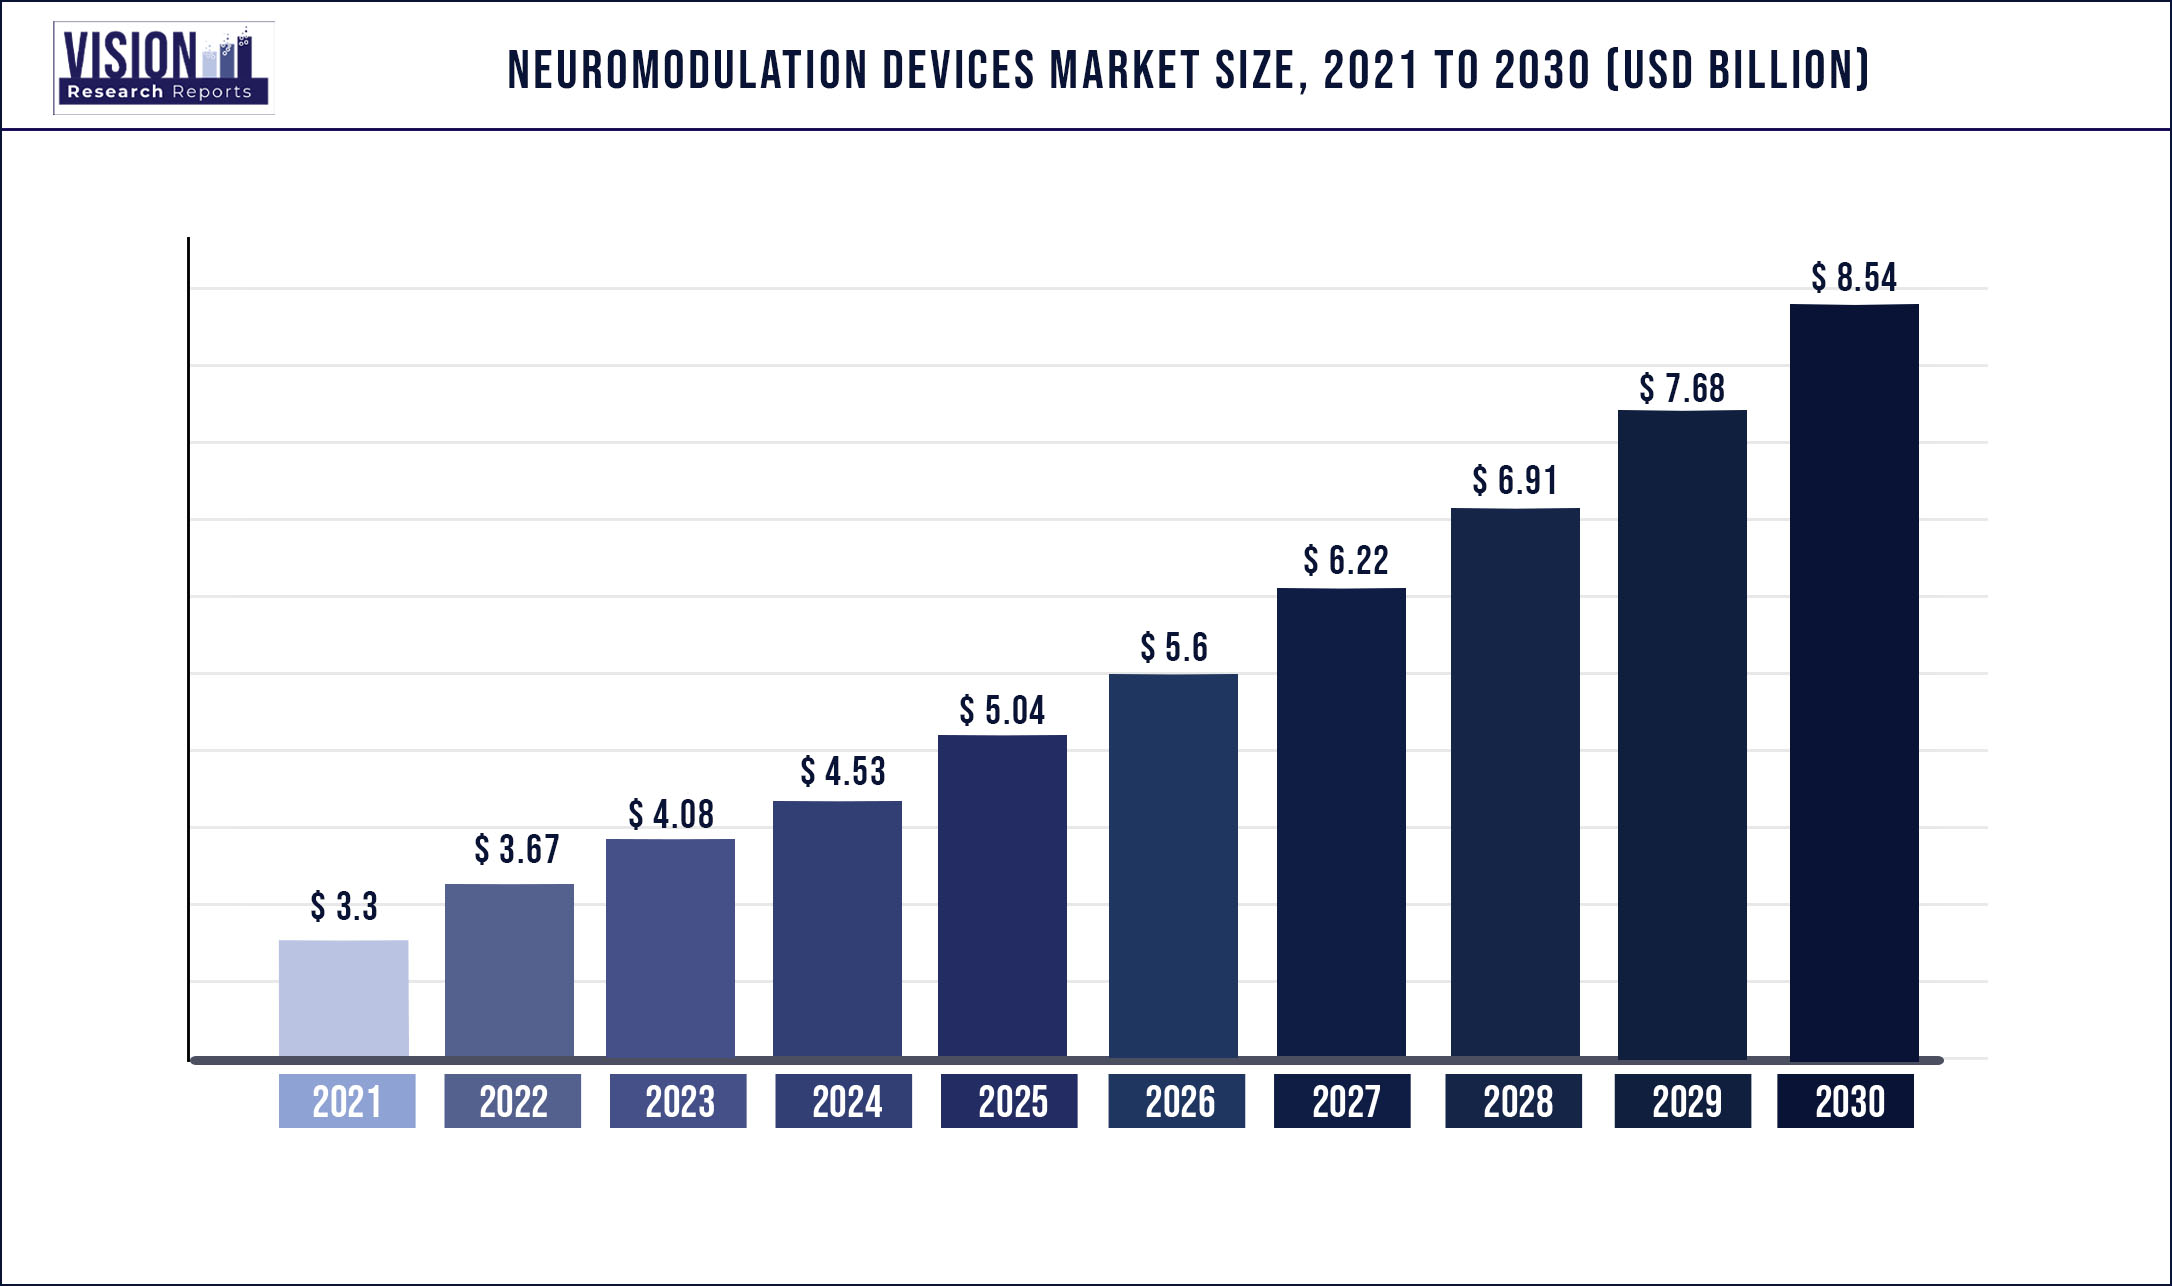 Neuromodulation Devices Market Size 2021 to 2030